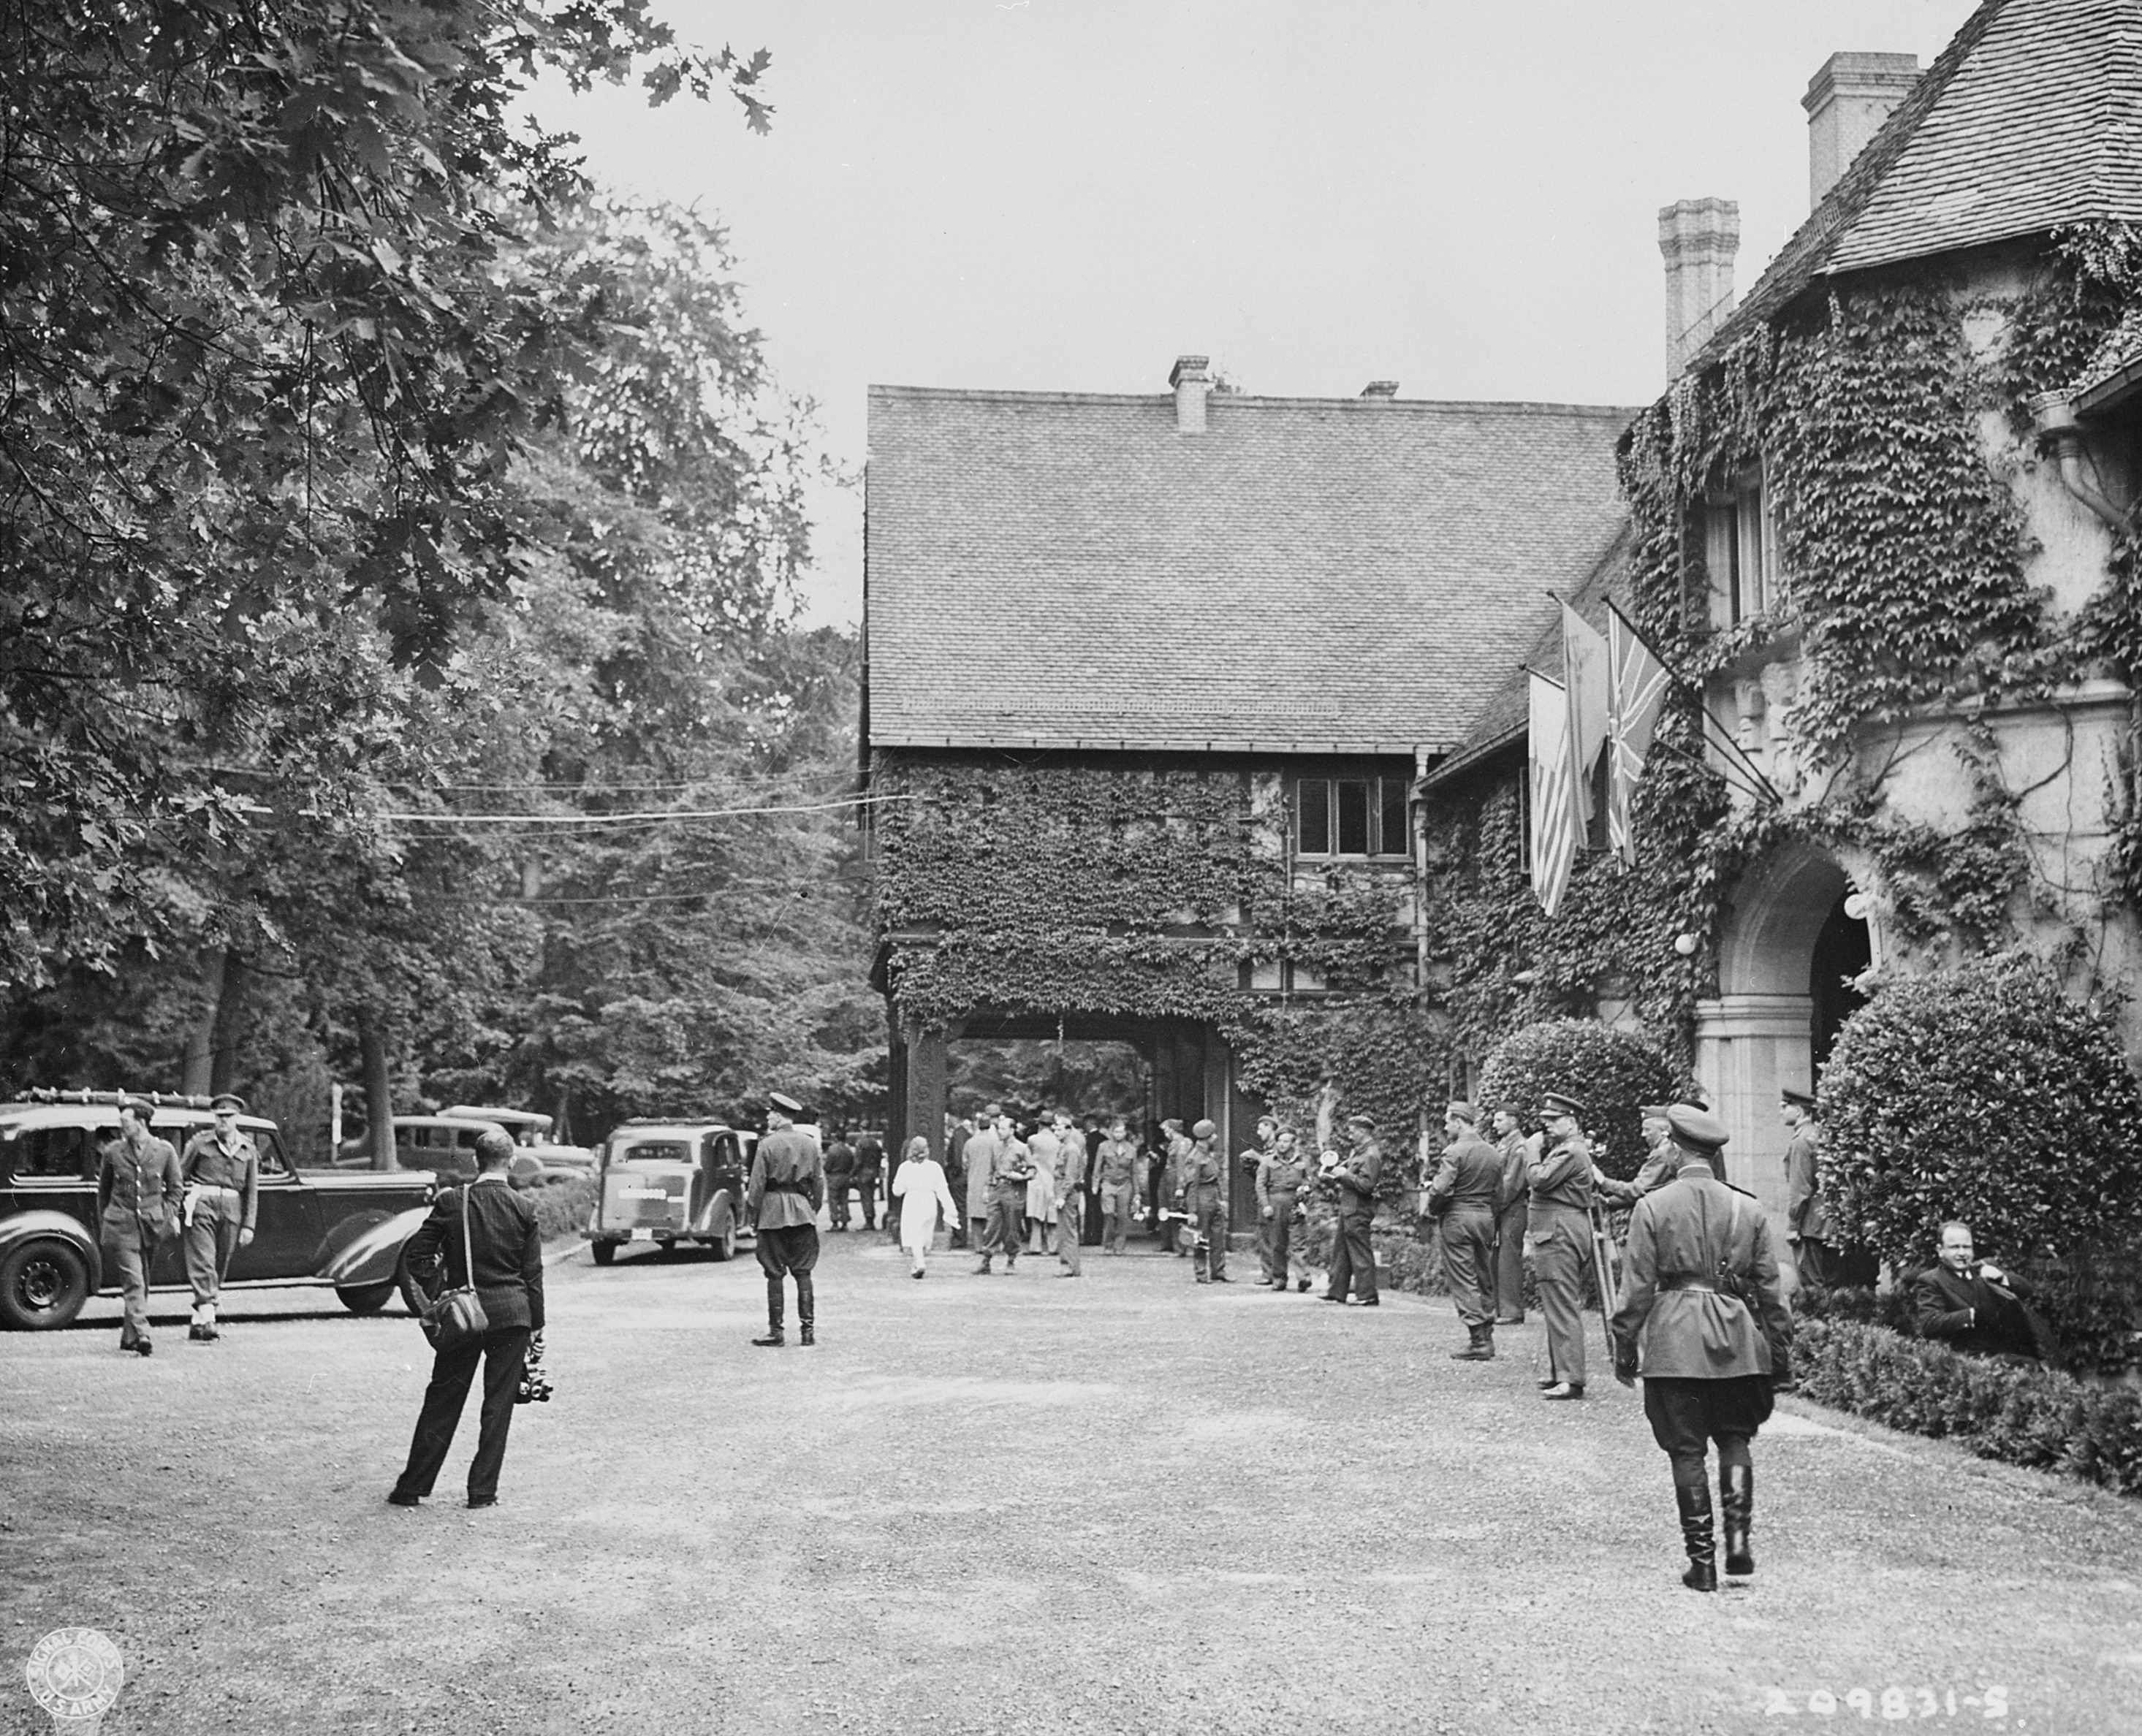 Schloss Cecilienhof during the Potsdam Conference, Germany, 18 Jul 1945